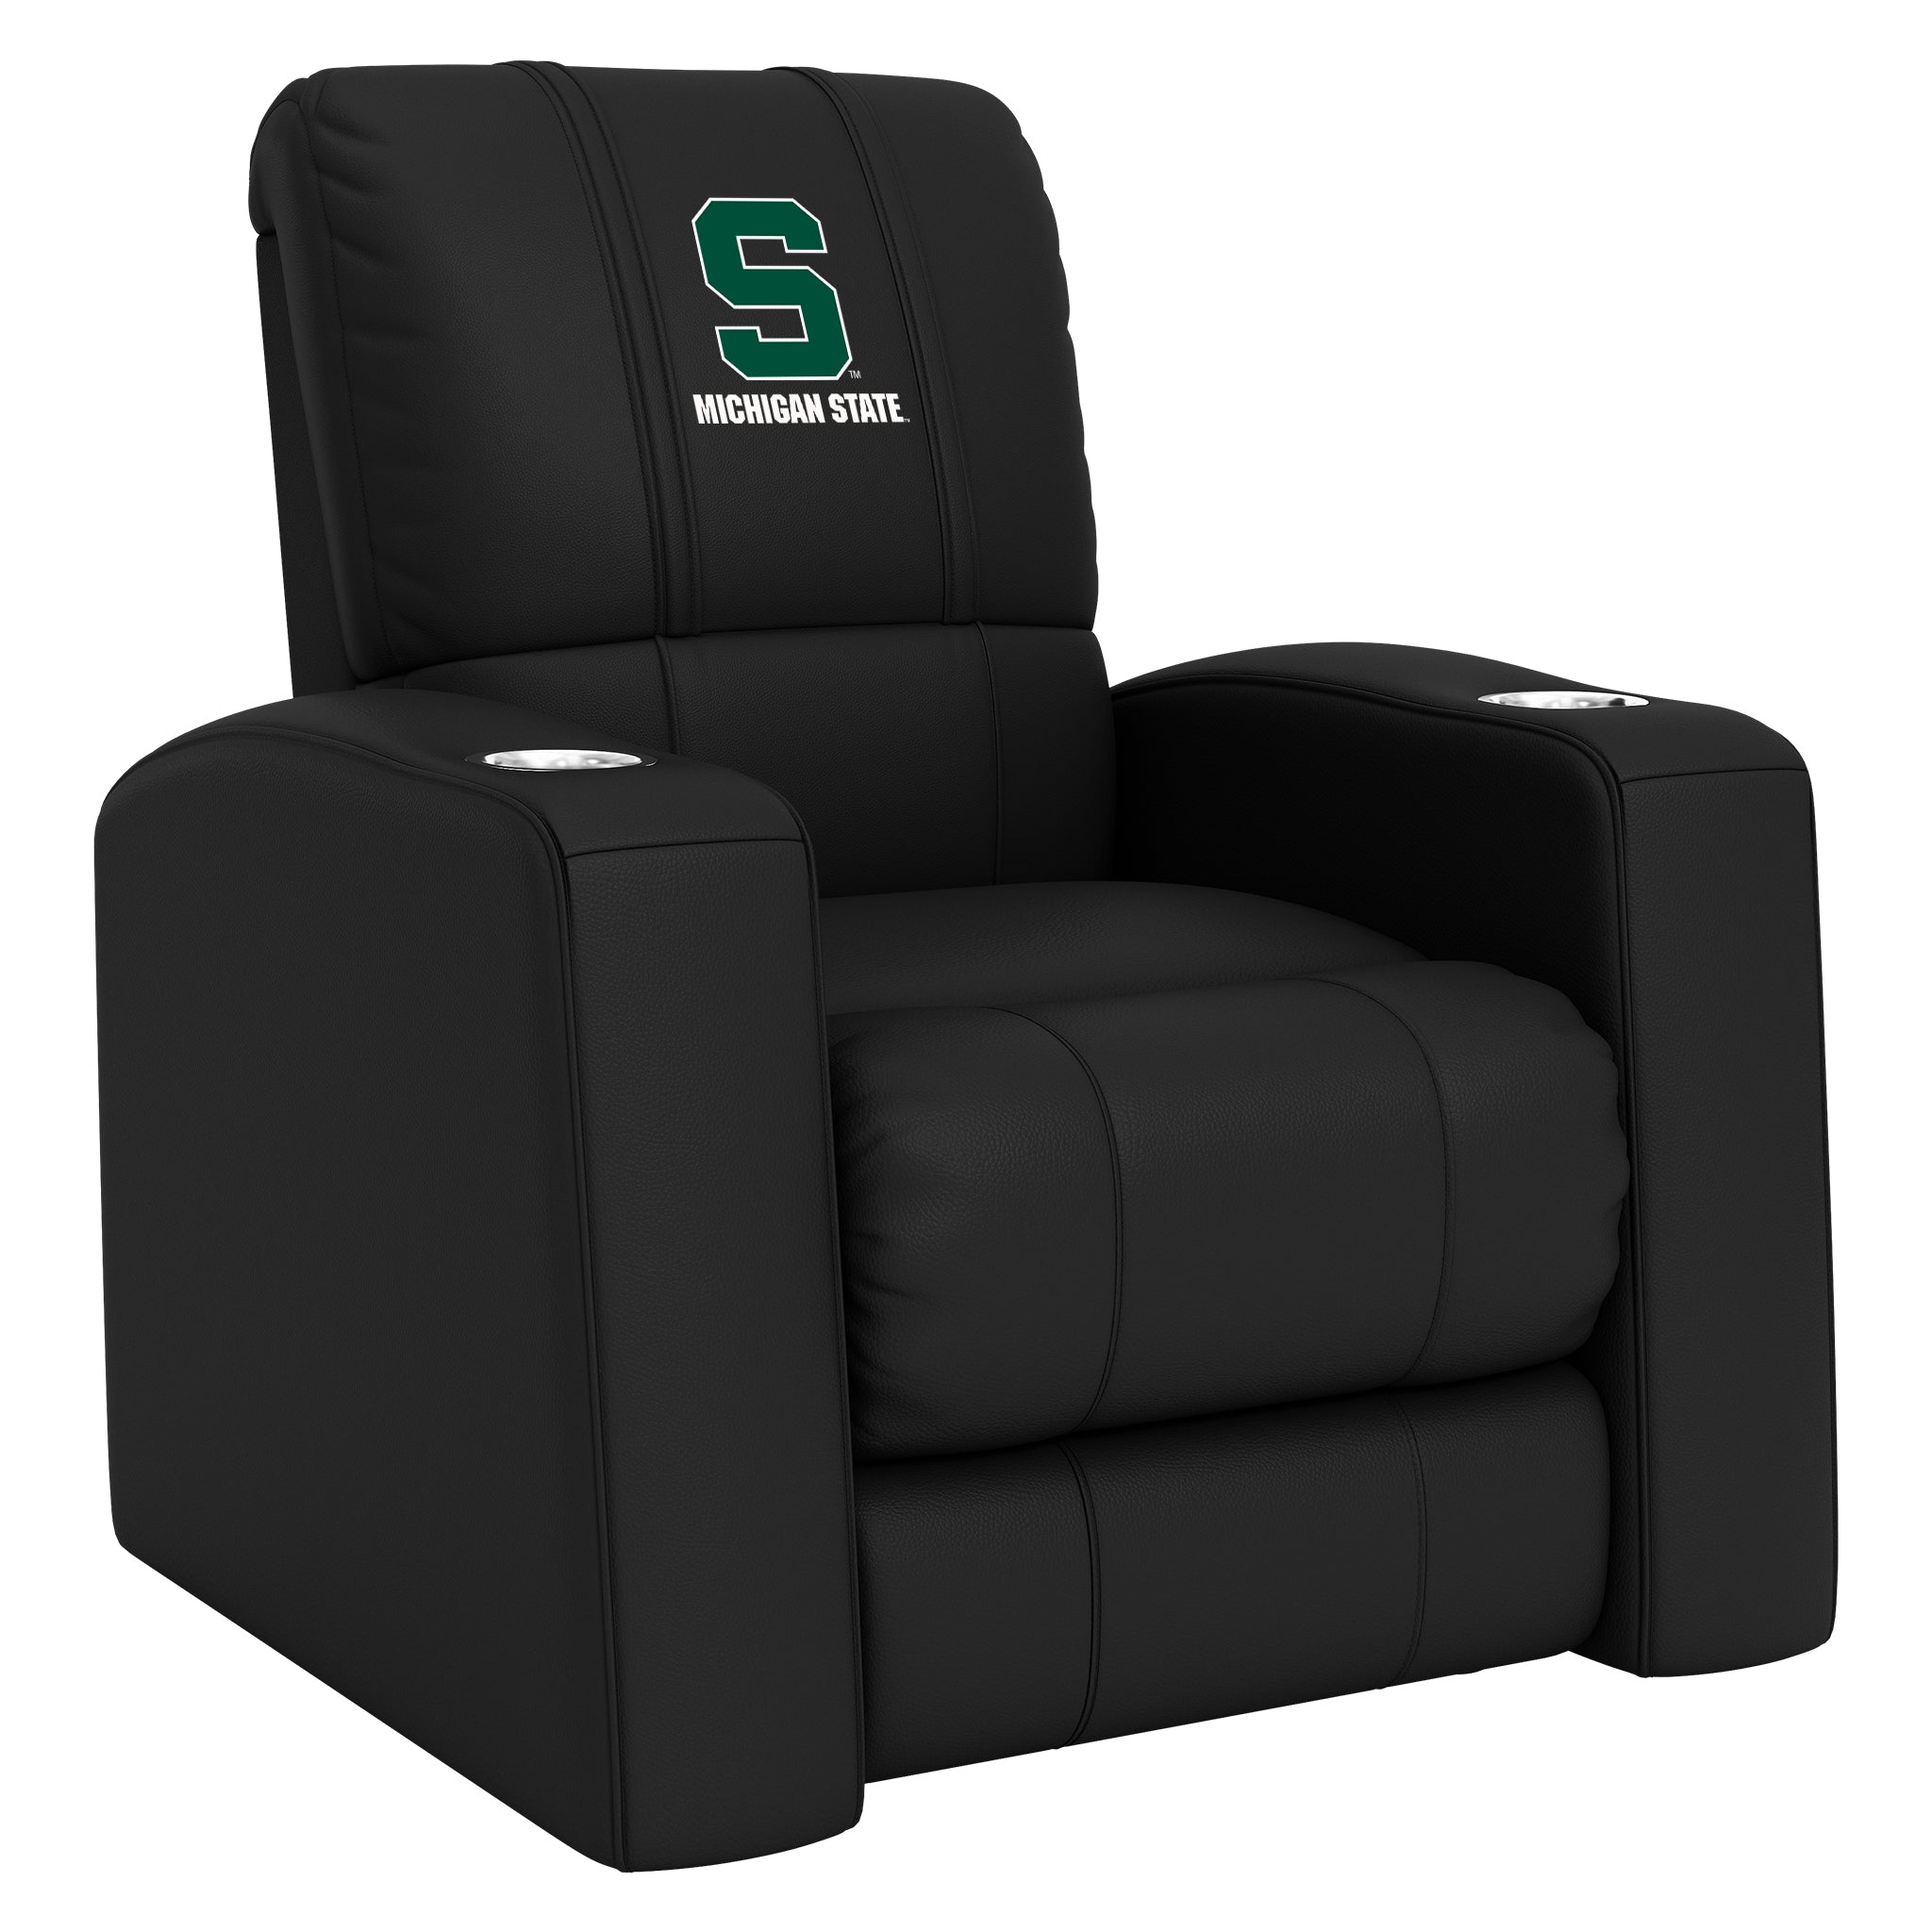 Michigan State Spartans Home Theater Recliner with Michigan State Secondary Logo